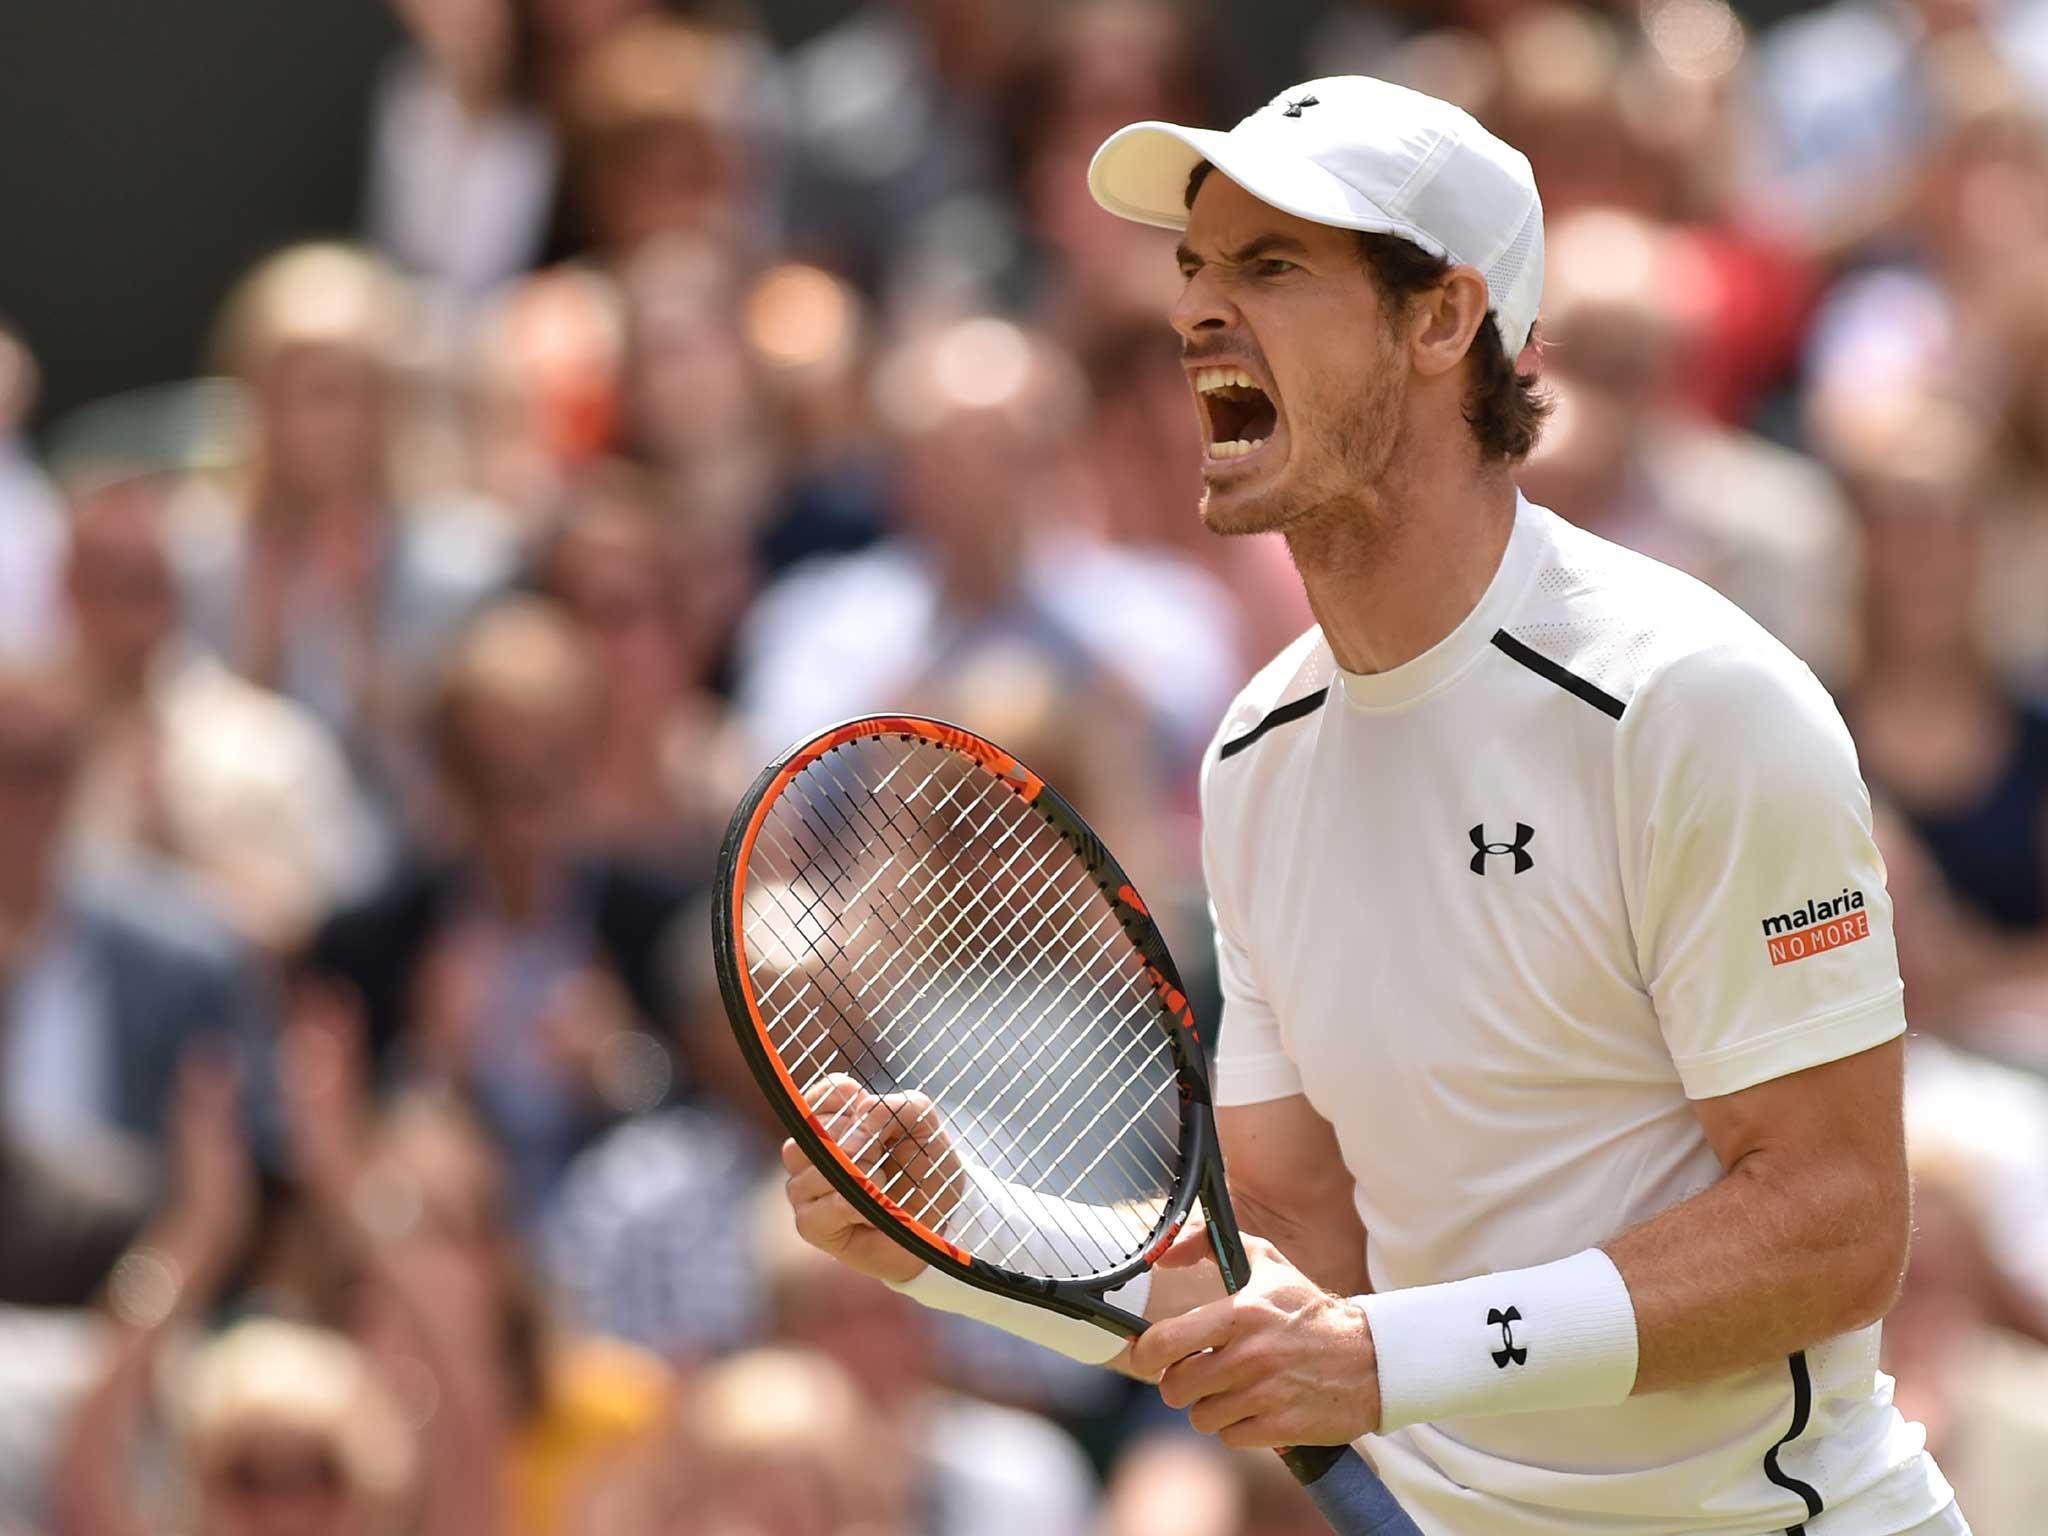 Andy Murray celebrates winning the first set in the Wimbledon men's final